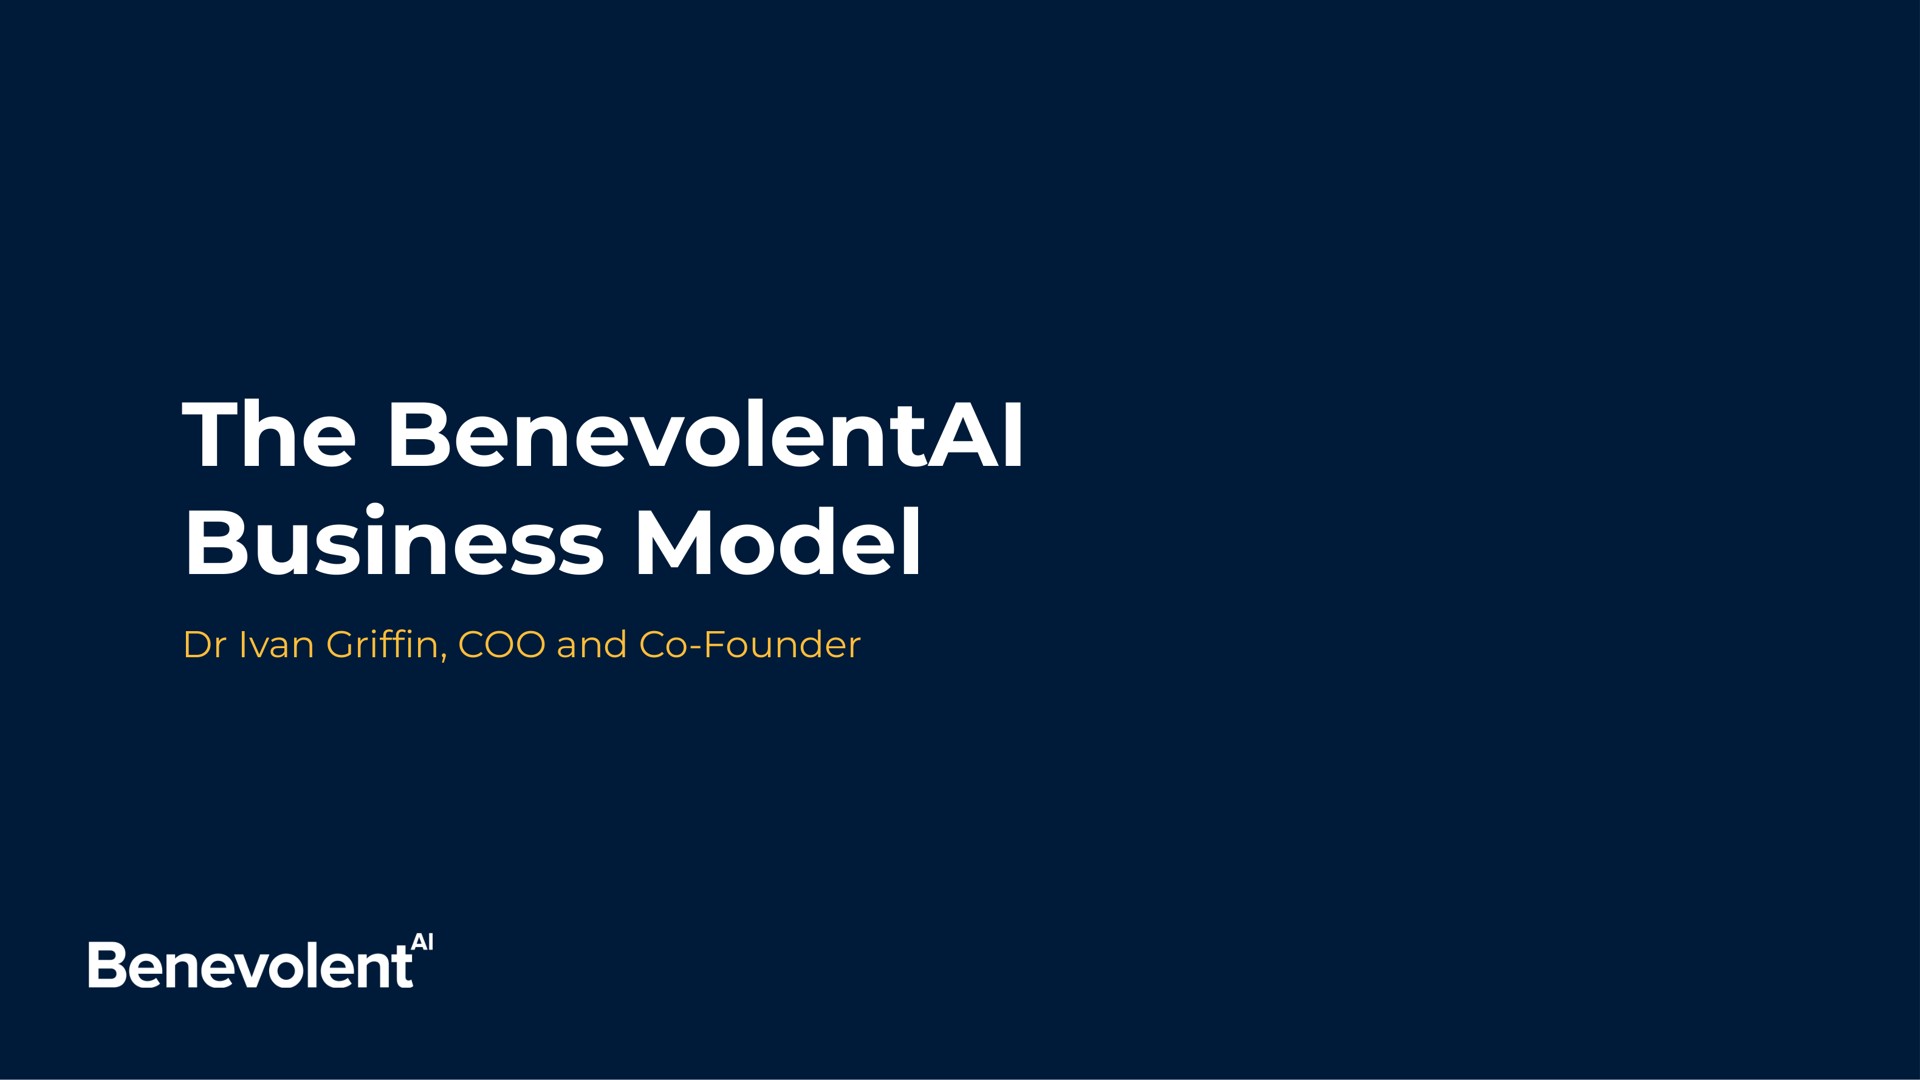 the business model coo and founder benevolent | BenevolentAI